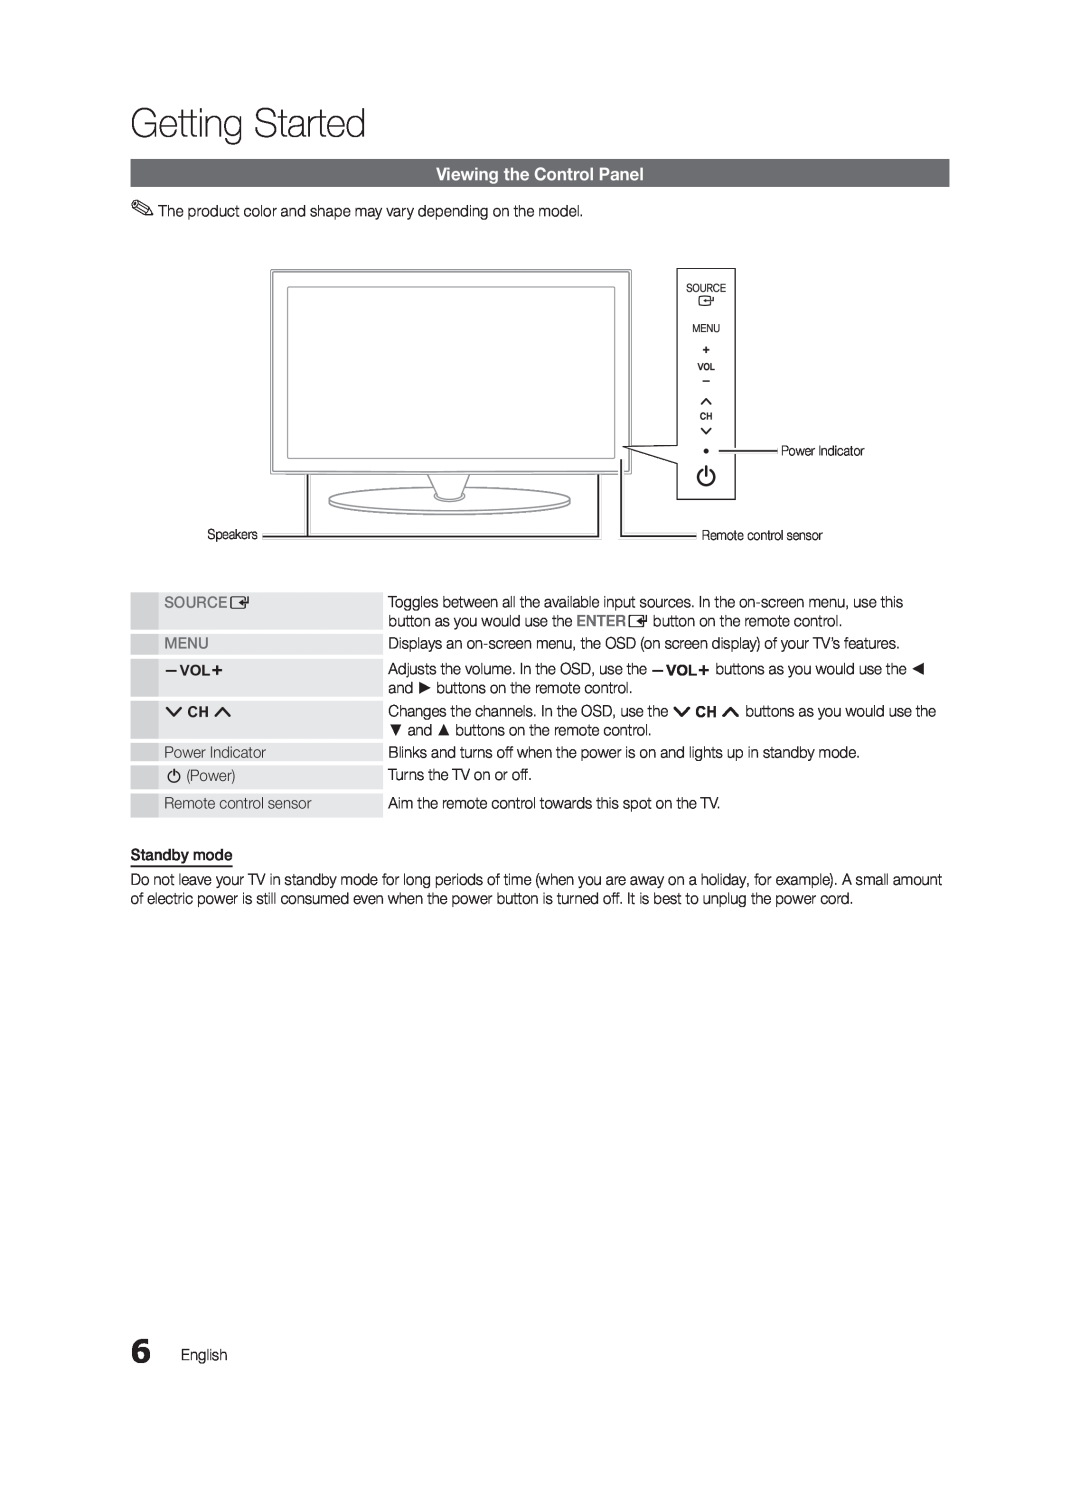 Samsung BN68-02576B-06, PC430-ZC user manual Viewing the Control Panel, Source E, Menu, Getting Started 